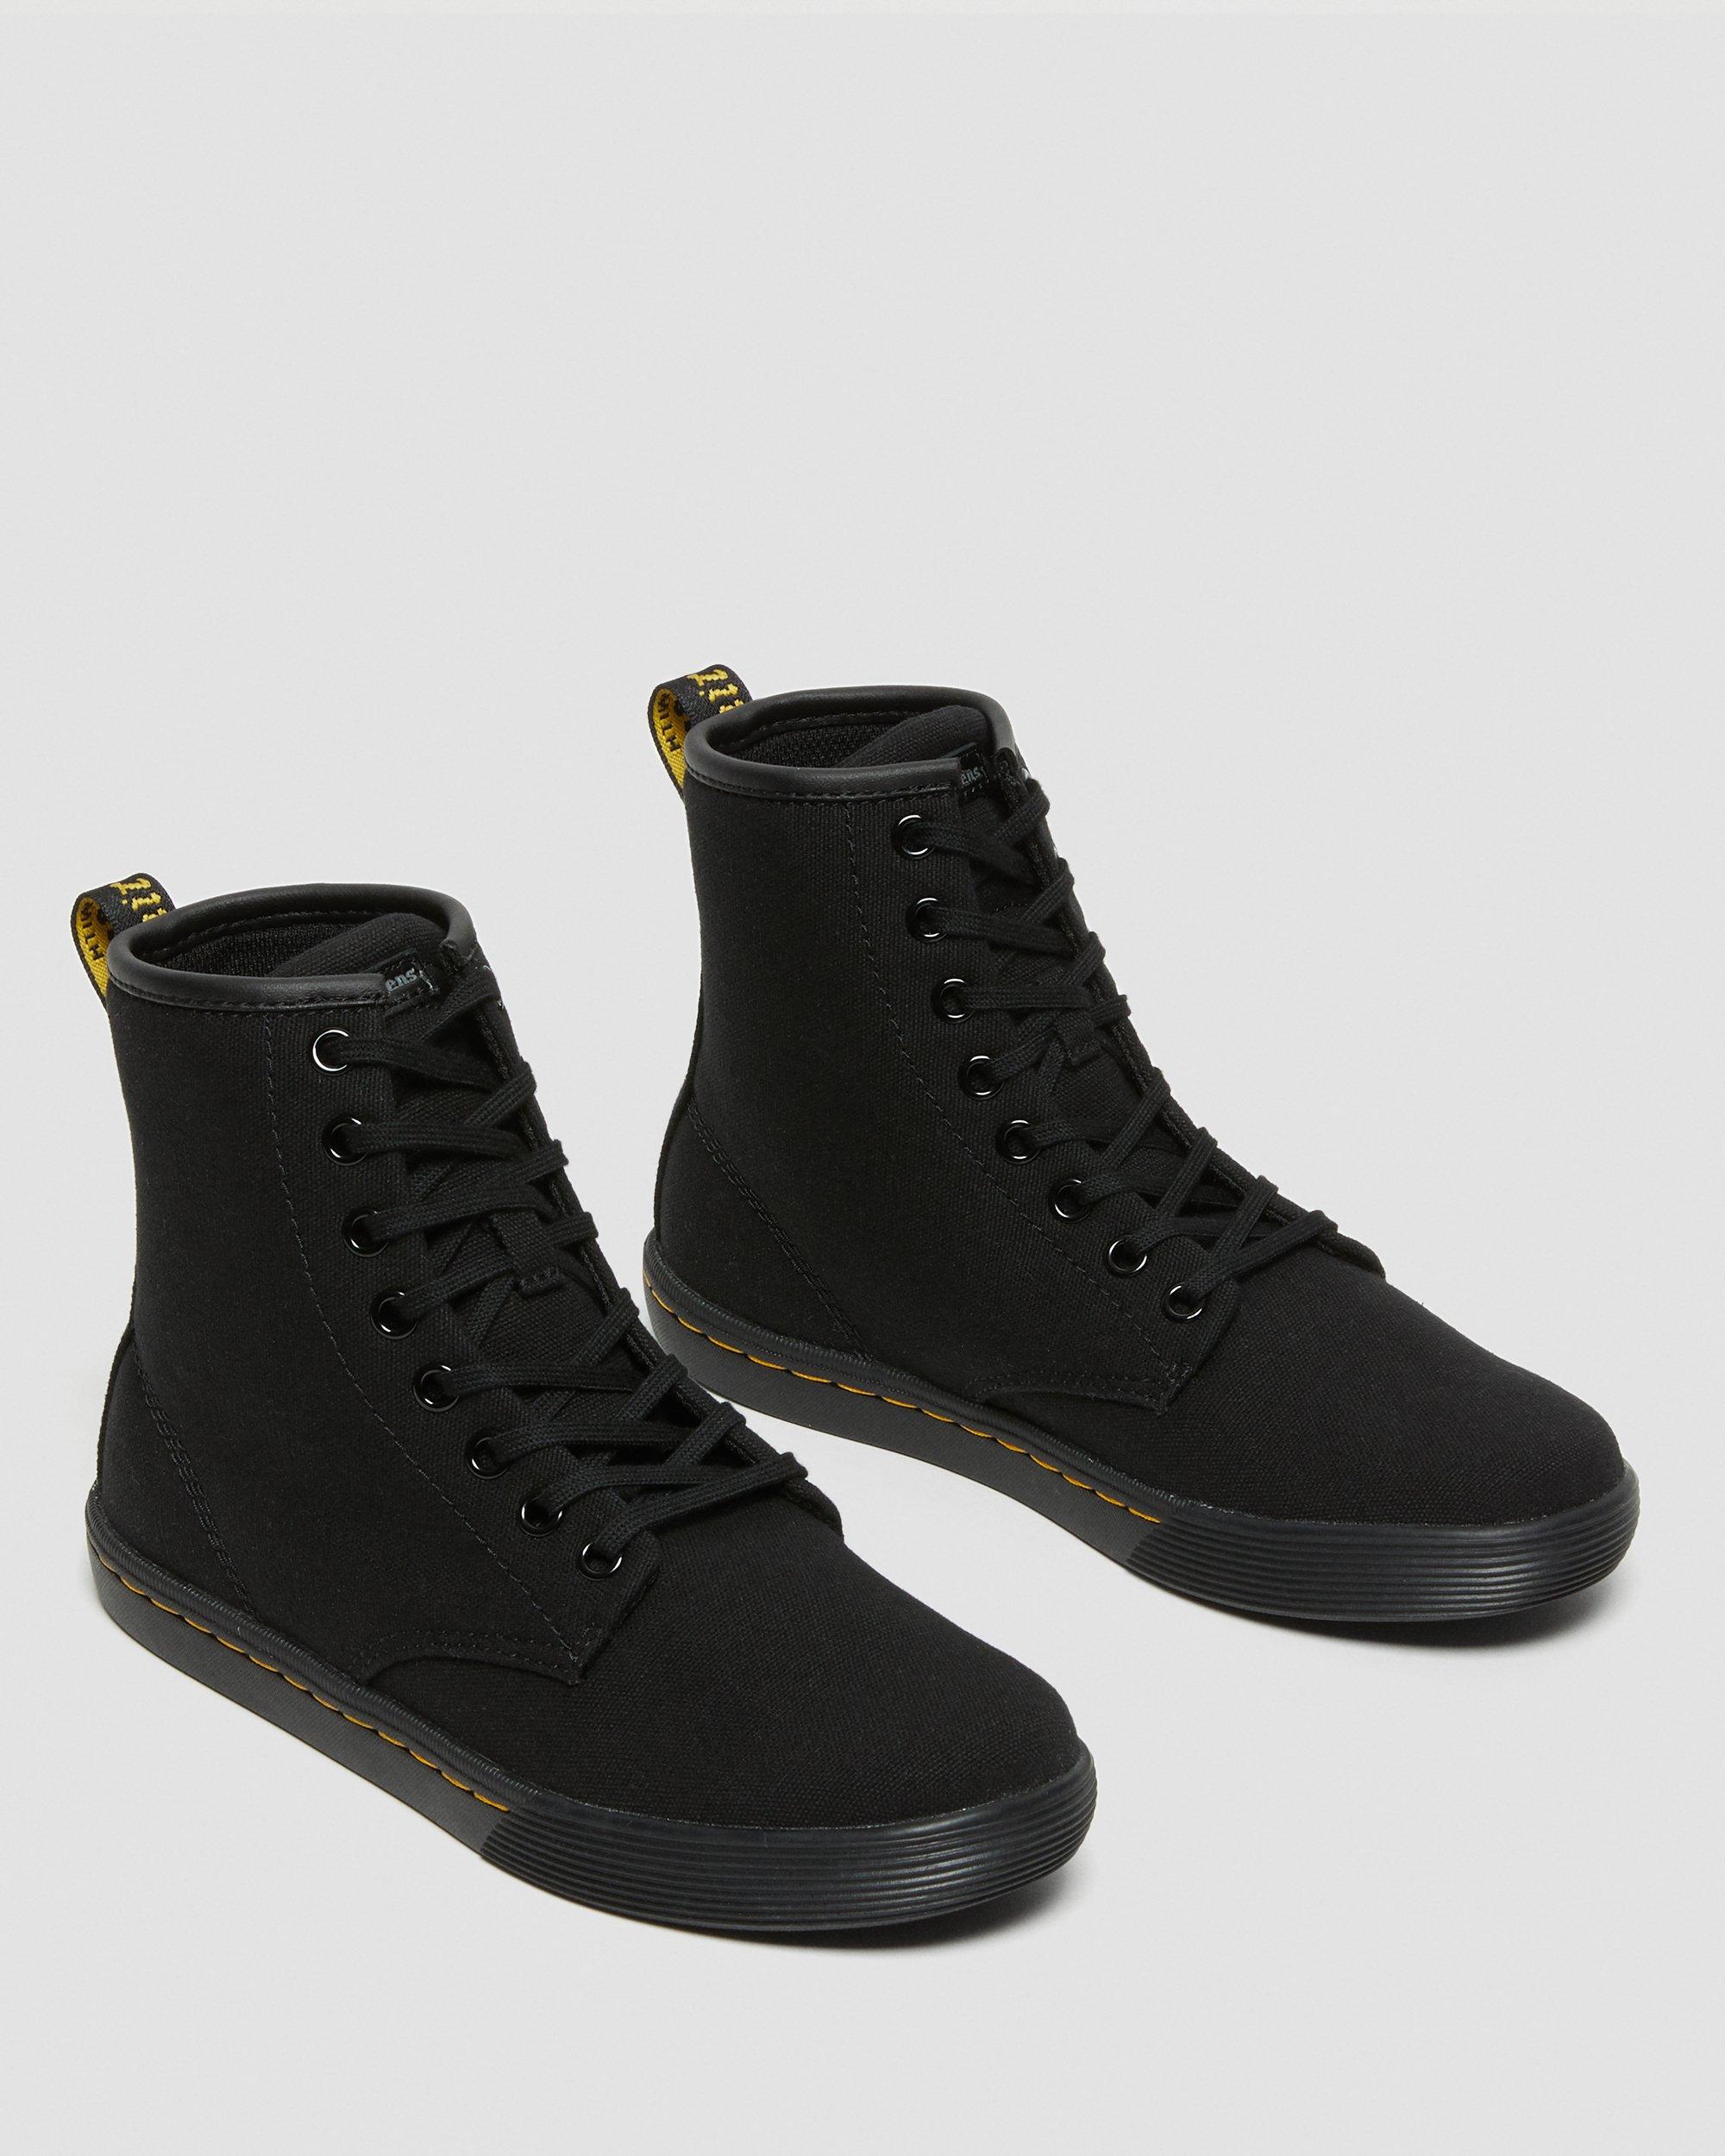 CANVAS CASUAL BOOTS | Dr. Martens 